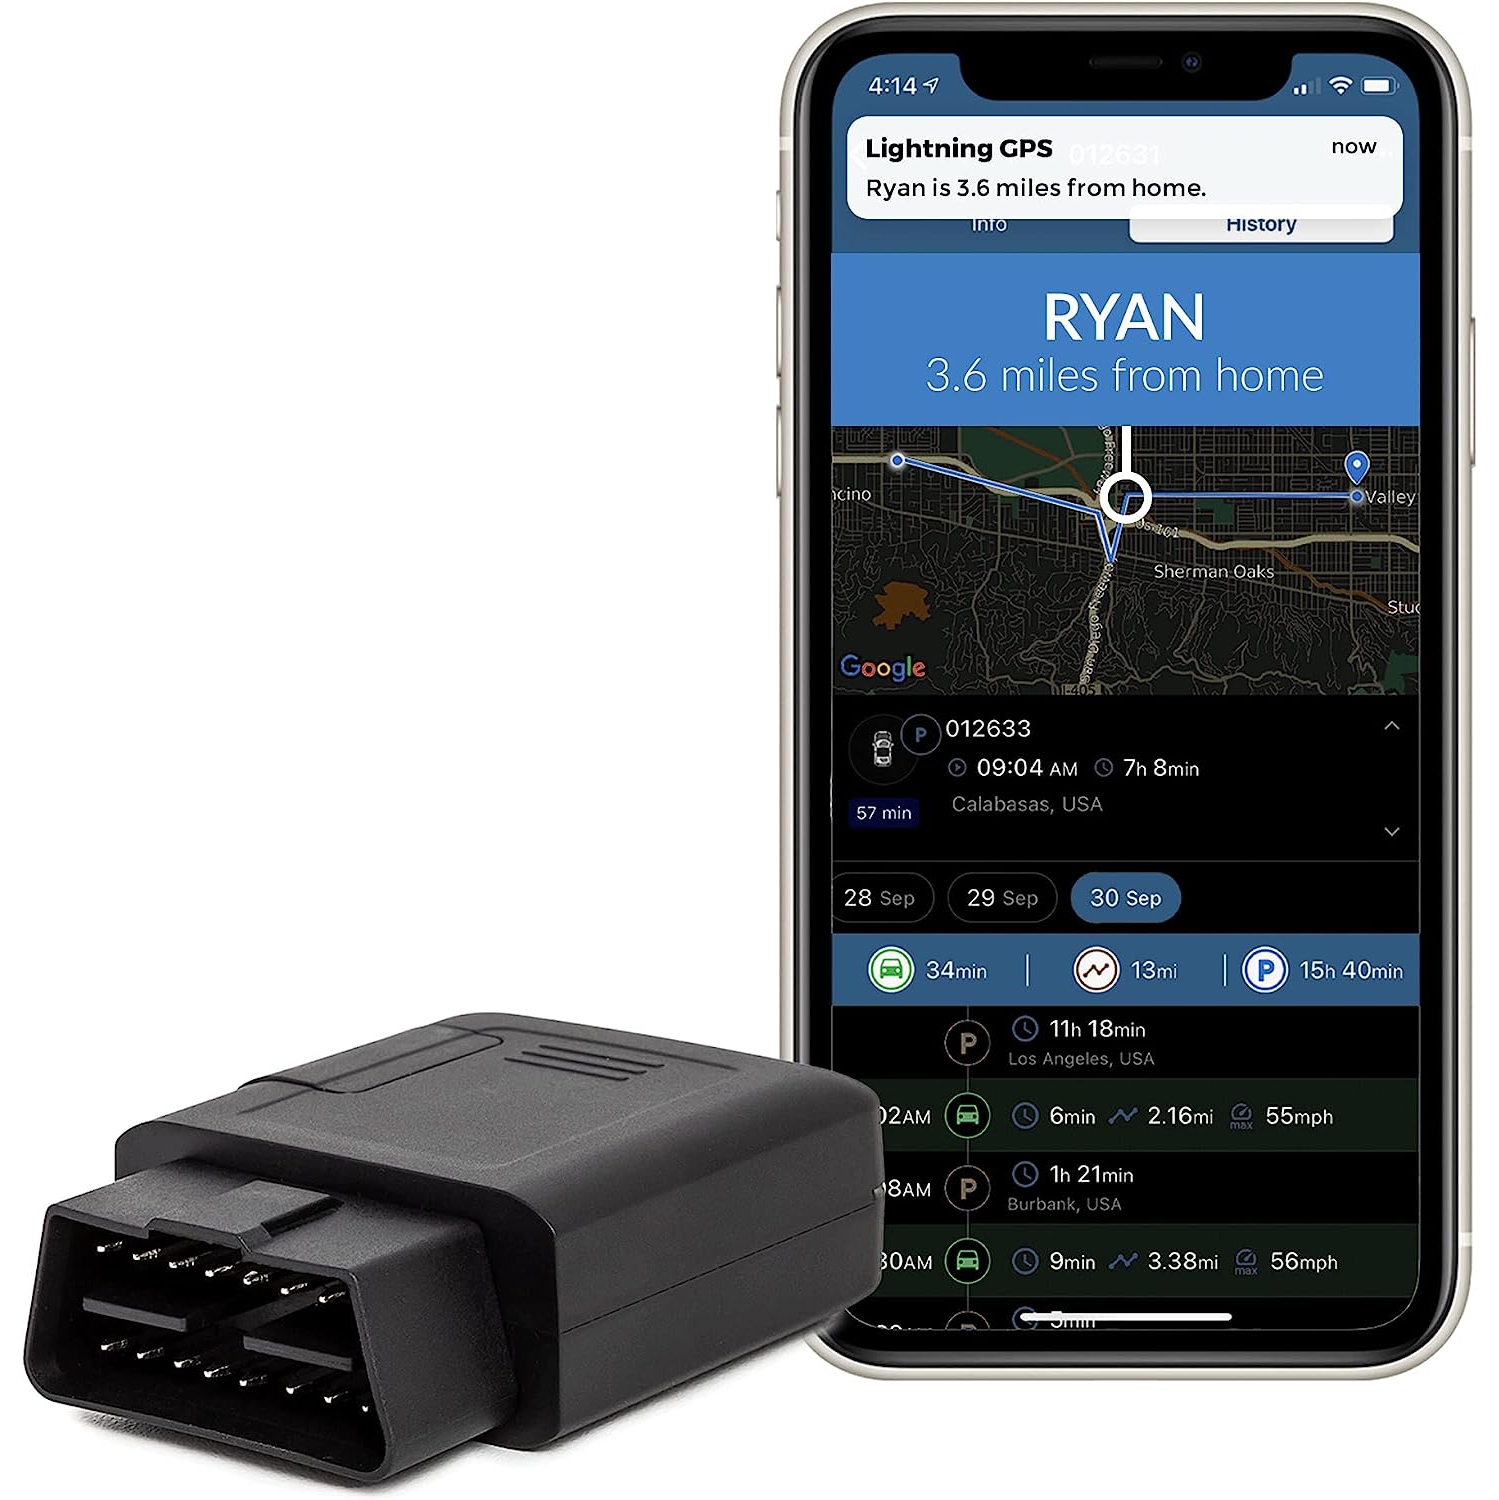 Lightning GPS OBD-II Real Time GPS Tracker for Vehicles. Car GPS Tracker Device. GPS Tracker Automotive Tracking Device for Cars. Hidden GPS Tracking Device. Subscription Required.